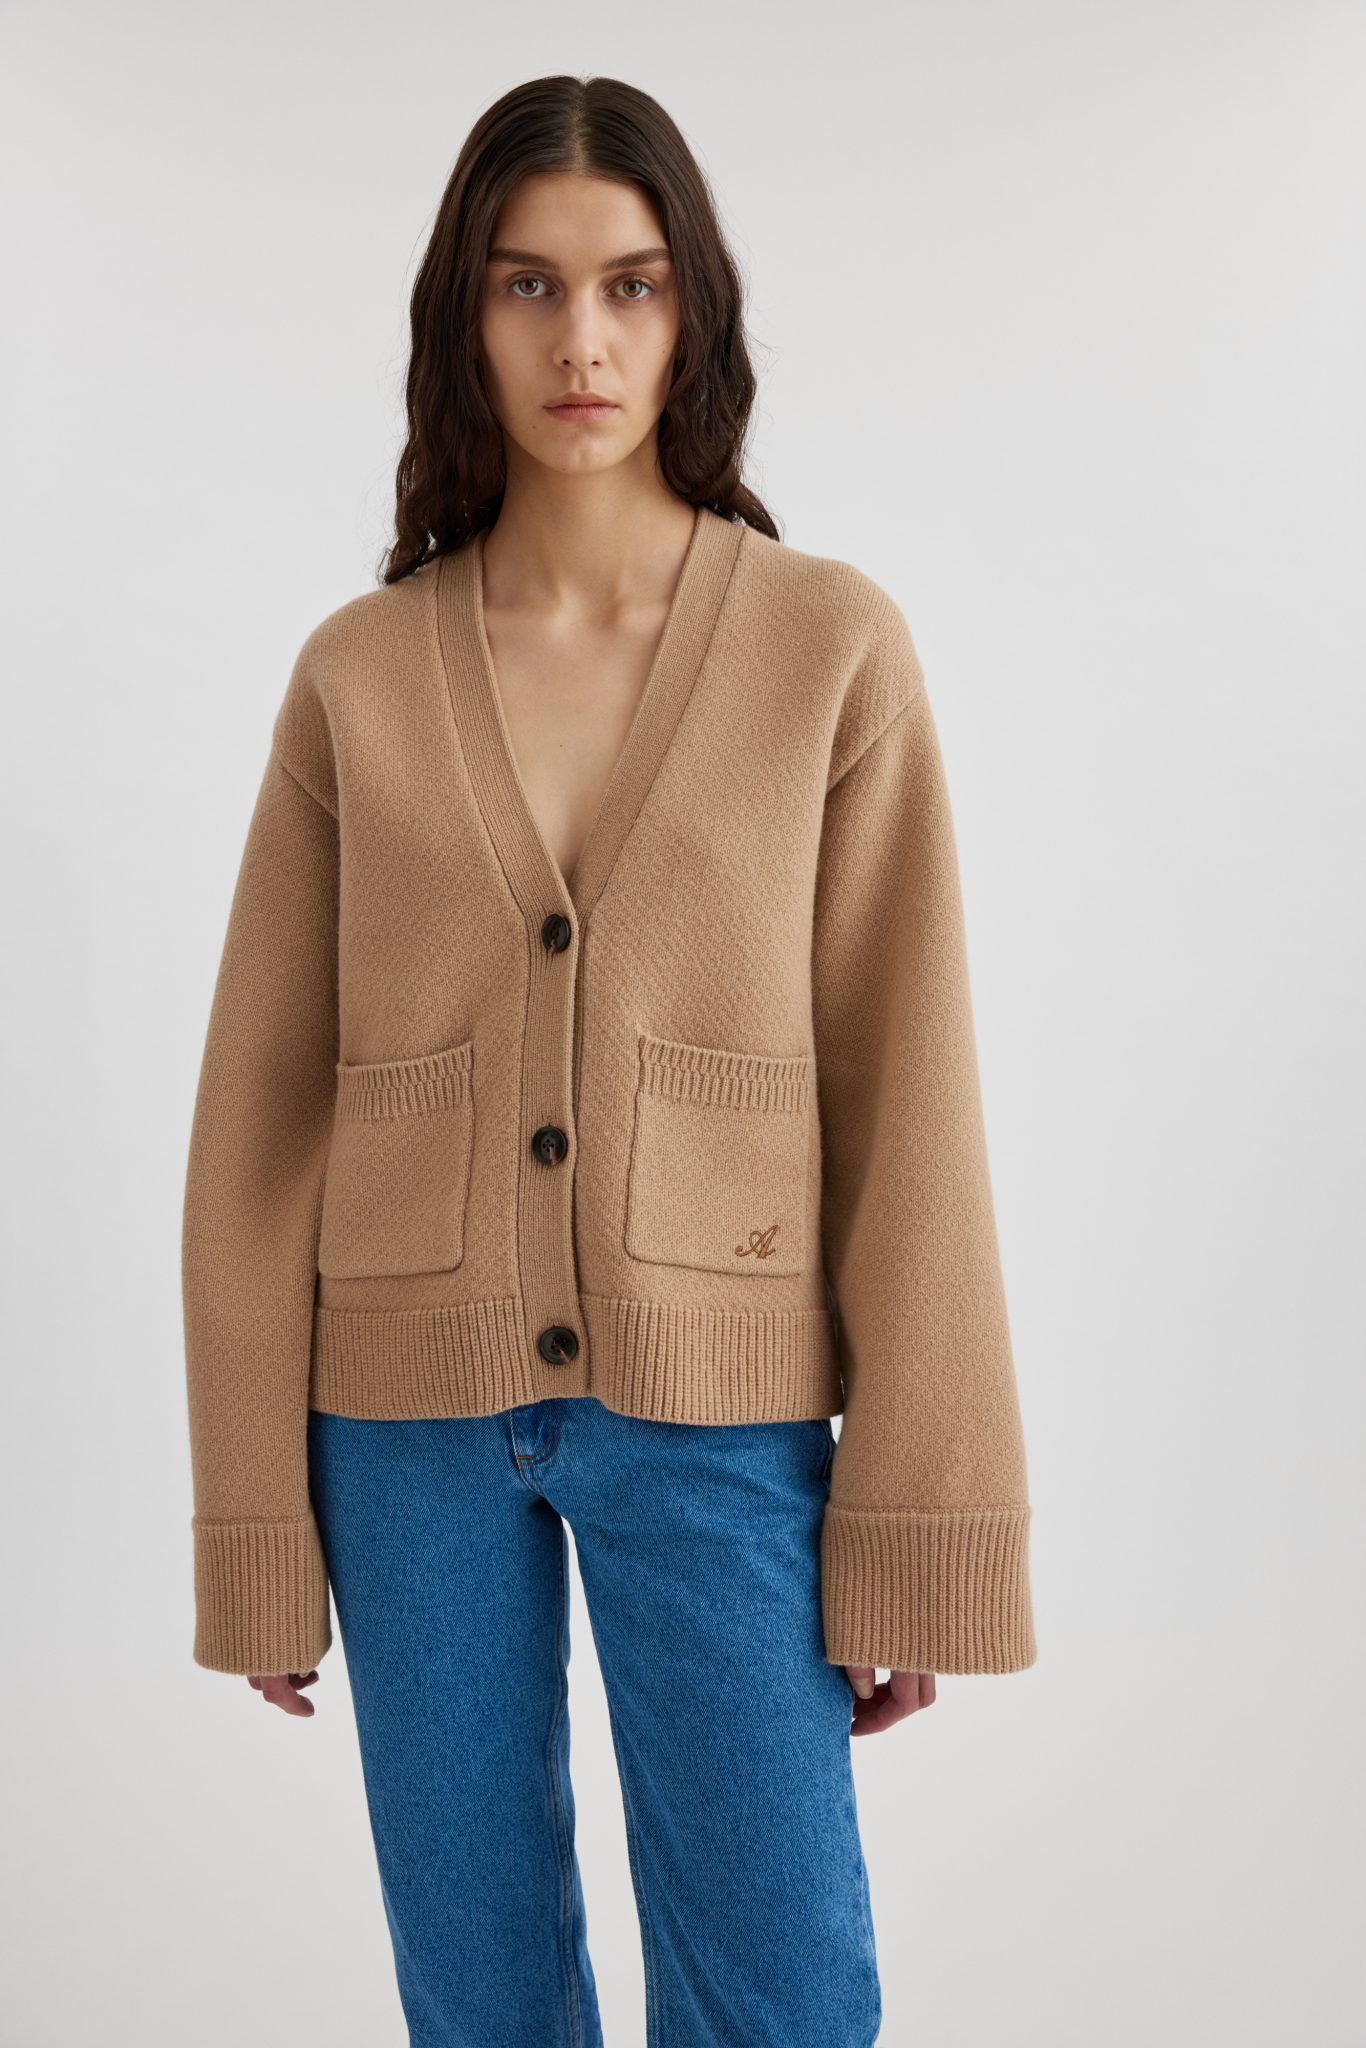 The Best Khaite Cardigan Dupes From $50 - TheBestDupes